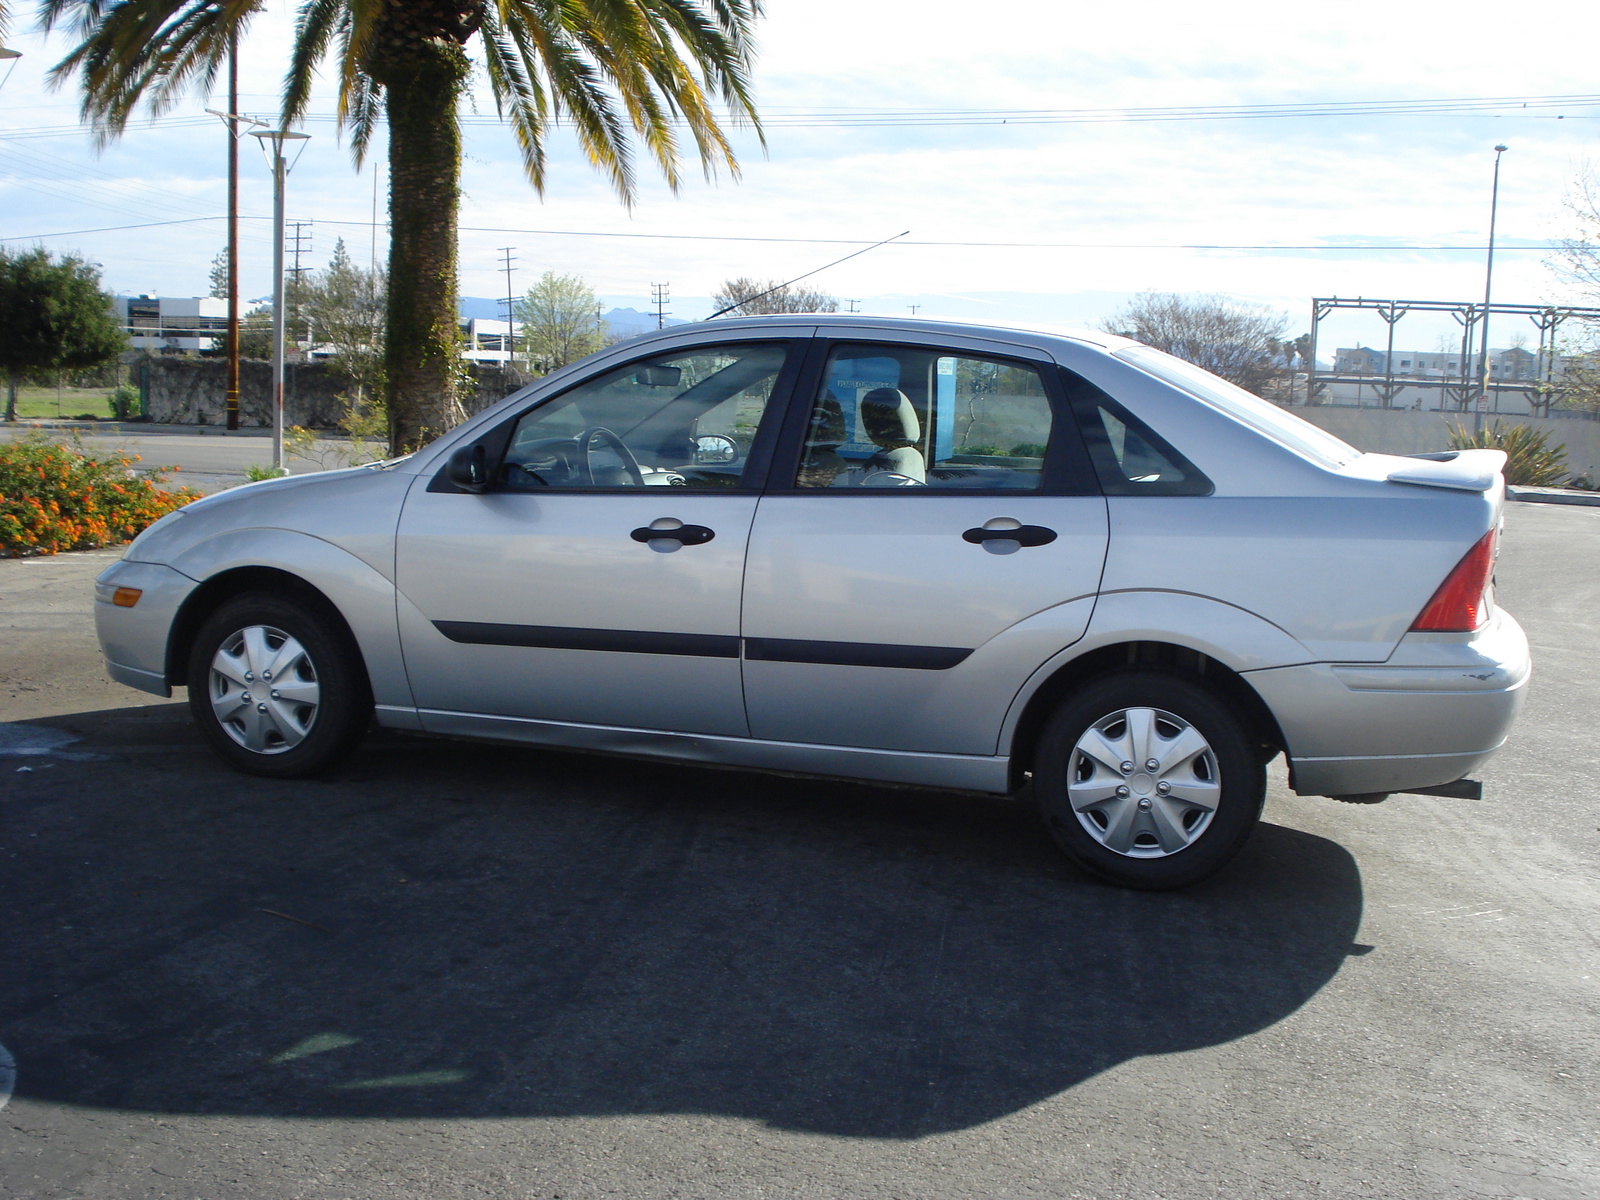 Picture of 2000 ford focus #7